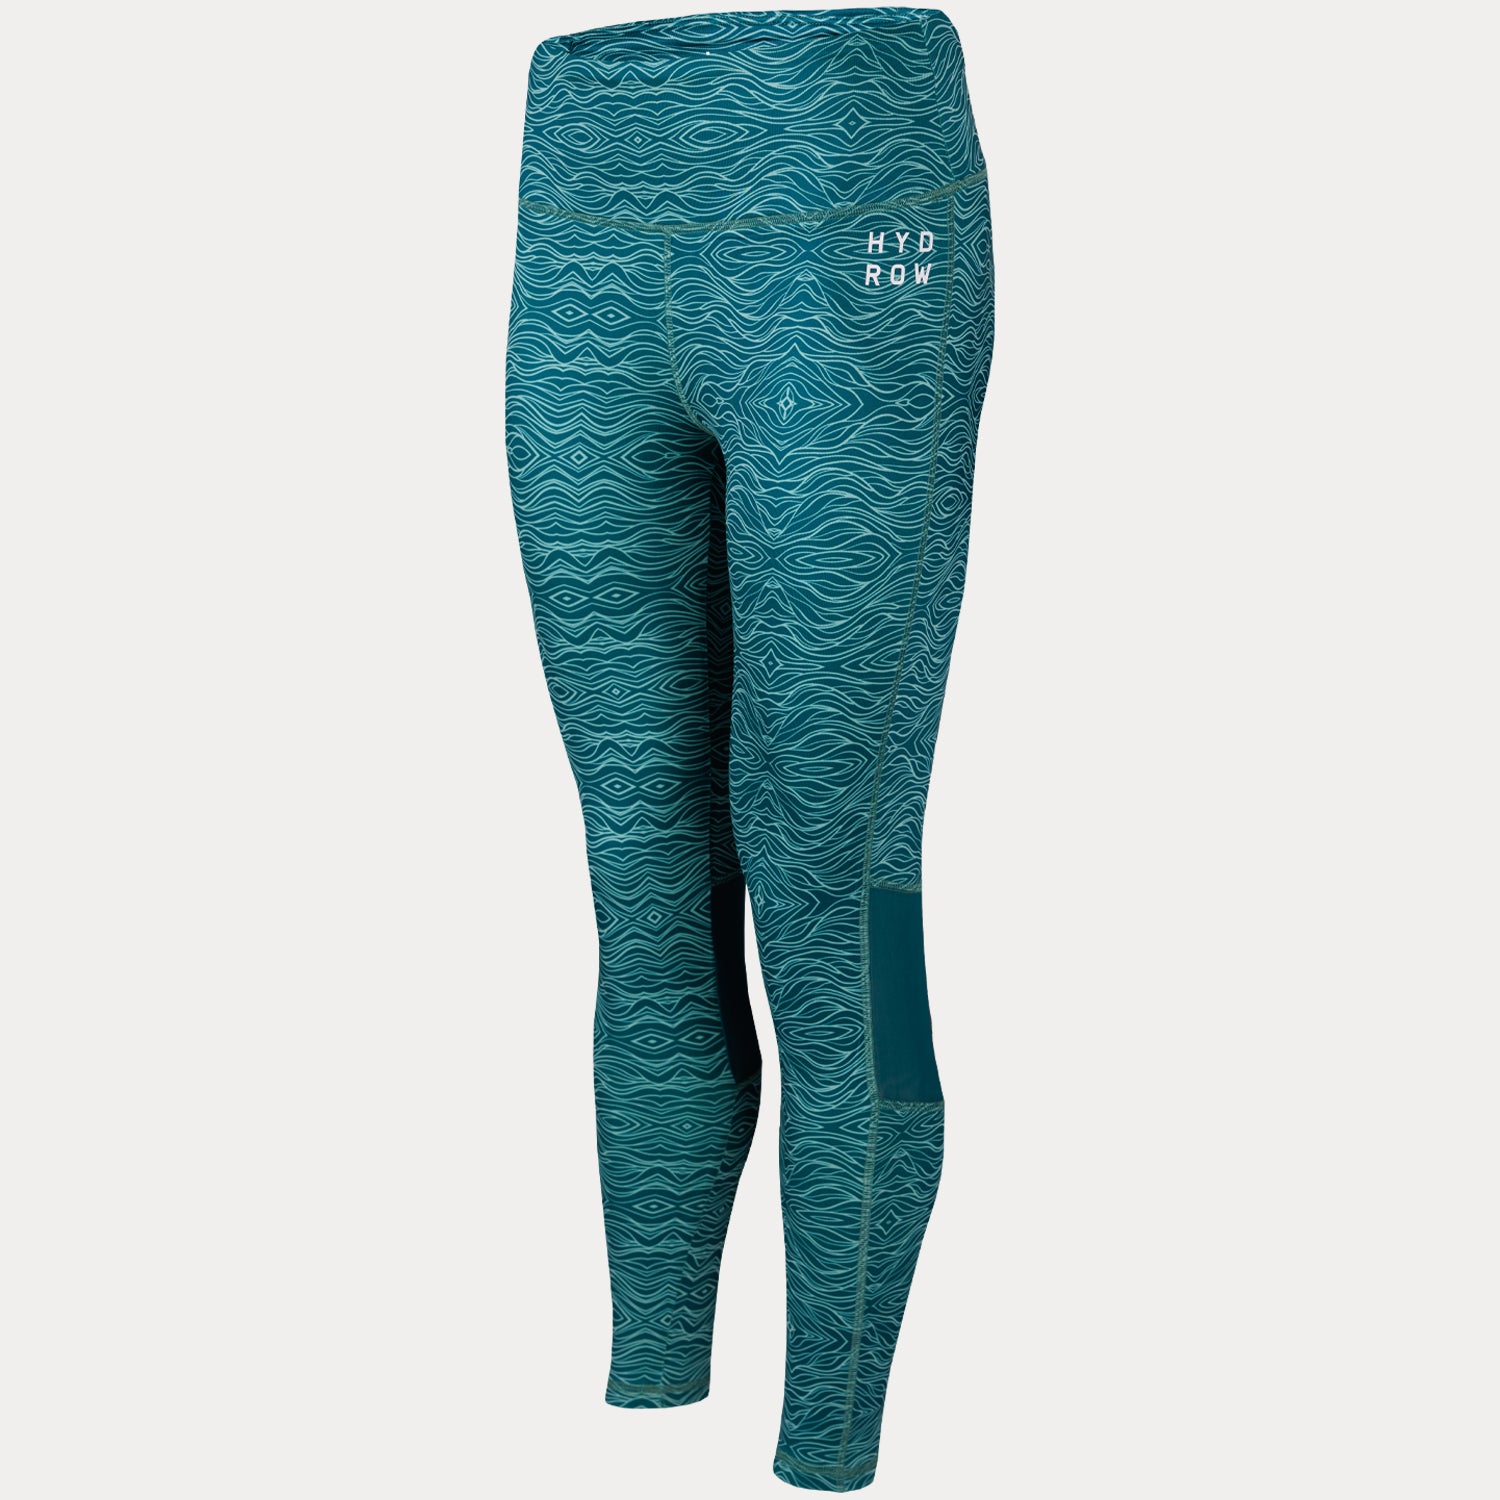 front view photo of wave pattern leggings with hydrow logo on left near hemline at top